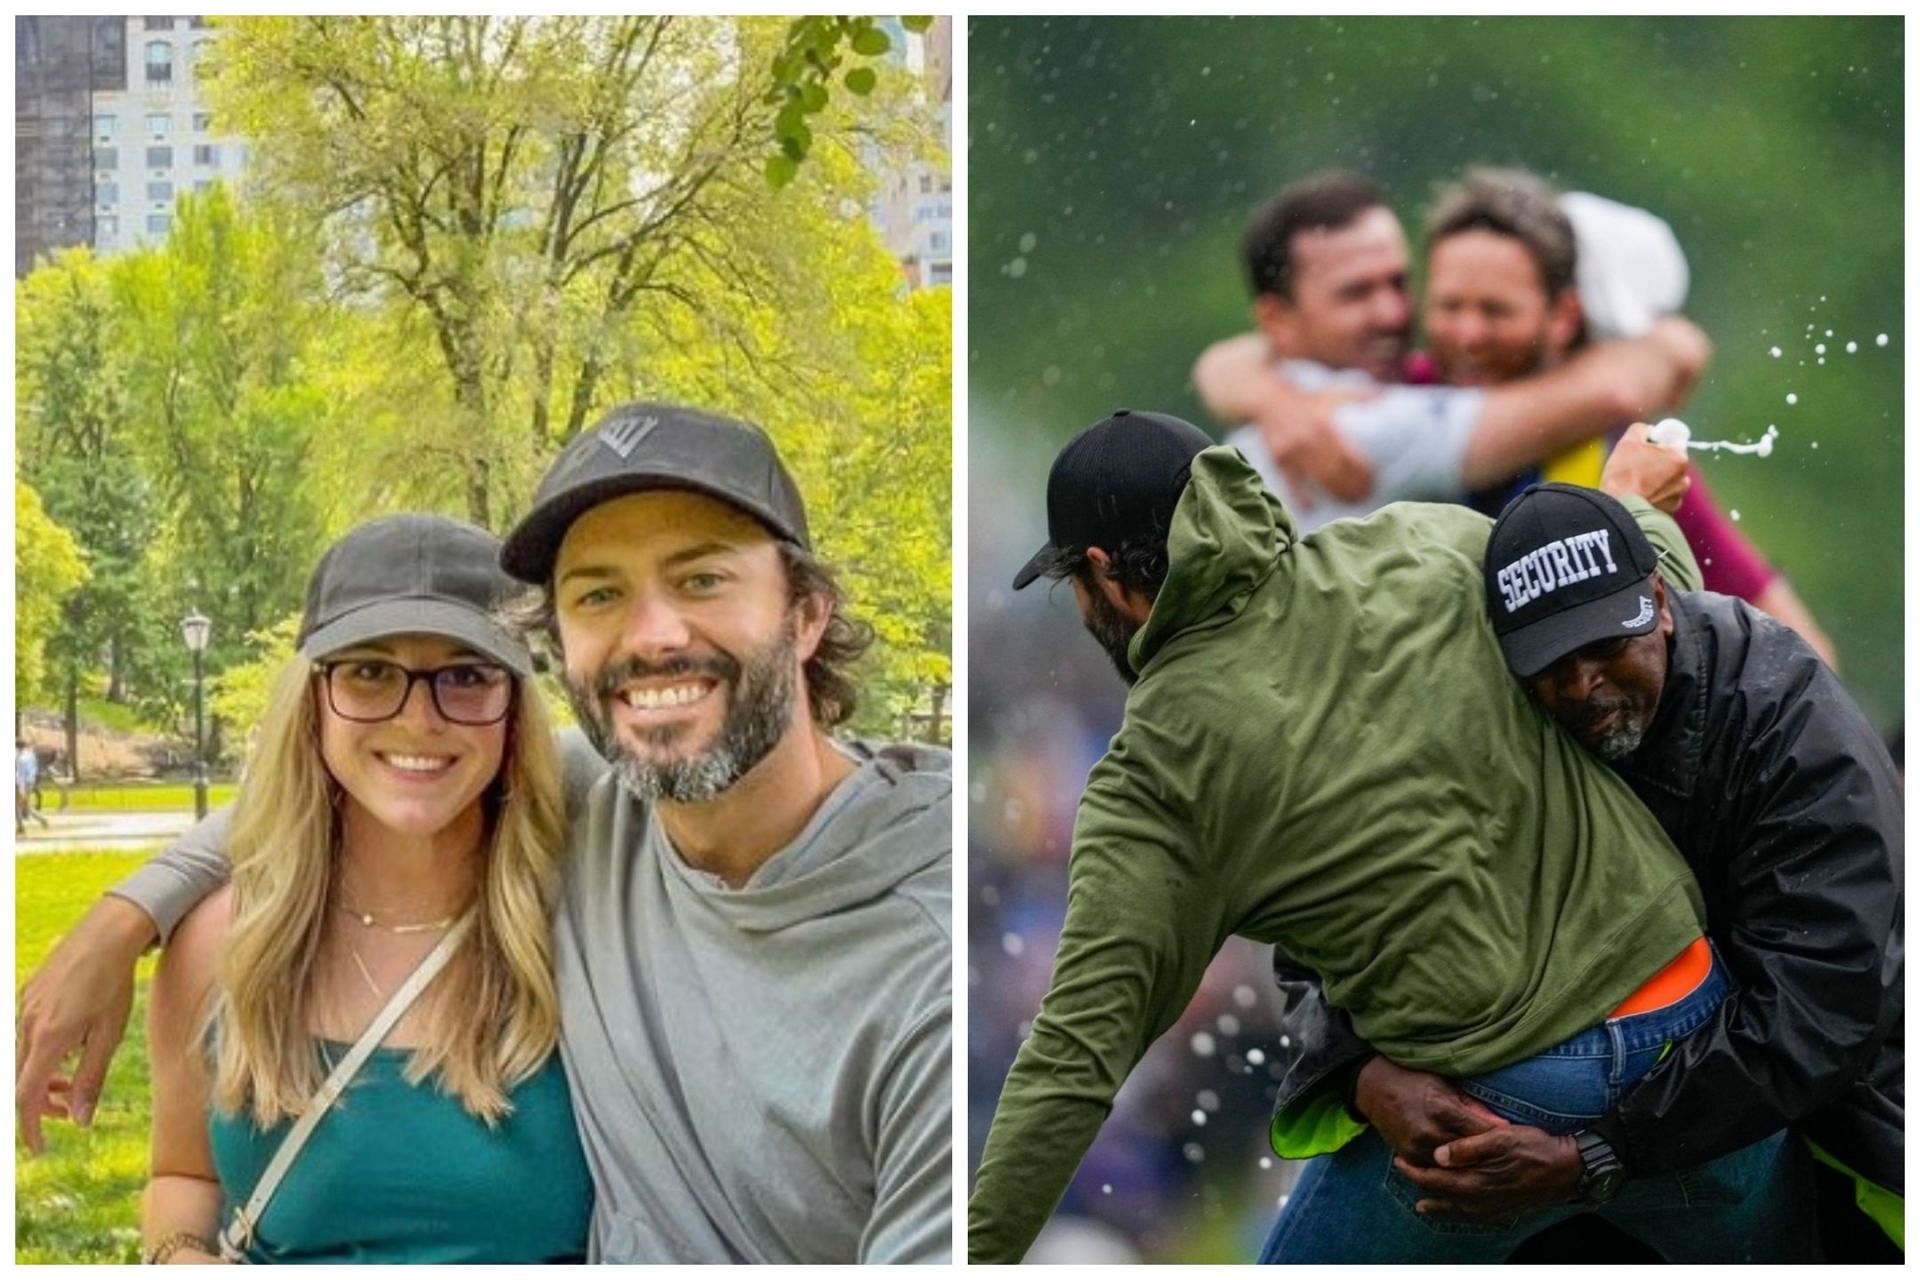 Jessica Hadwin reacted on husband Adam Hadwin being tackled during rbc canadian open